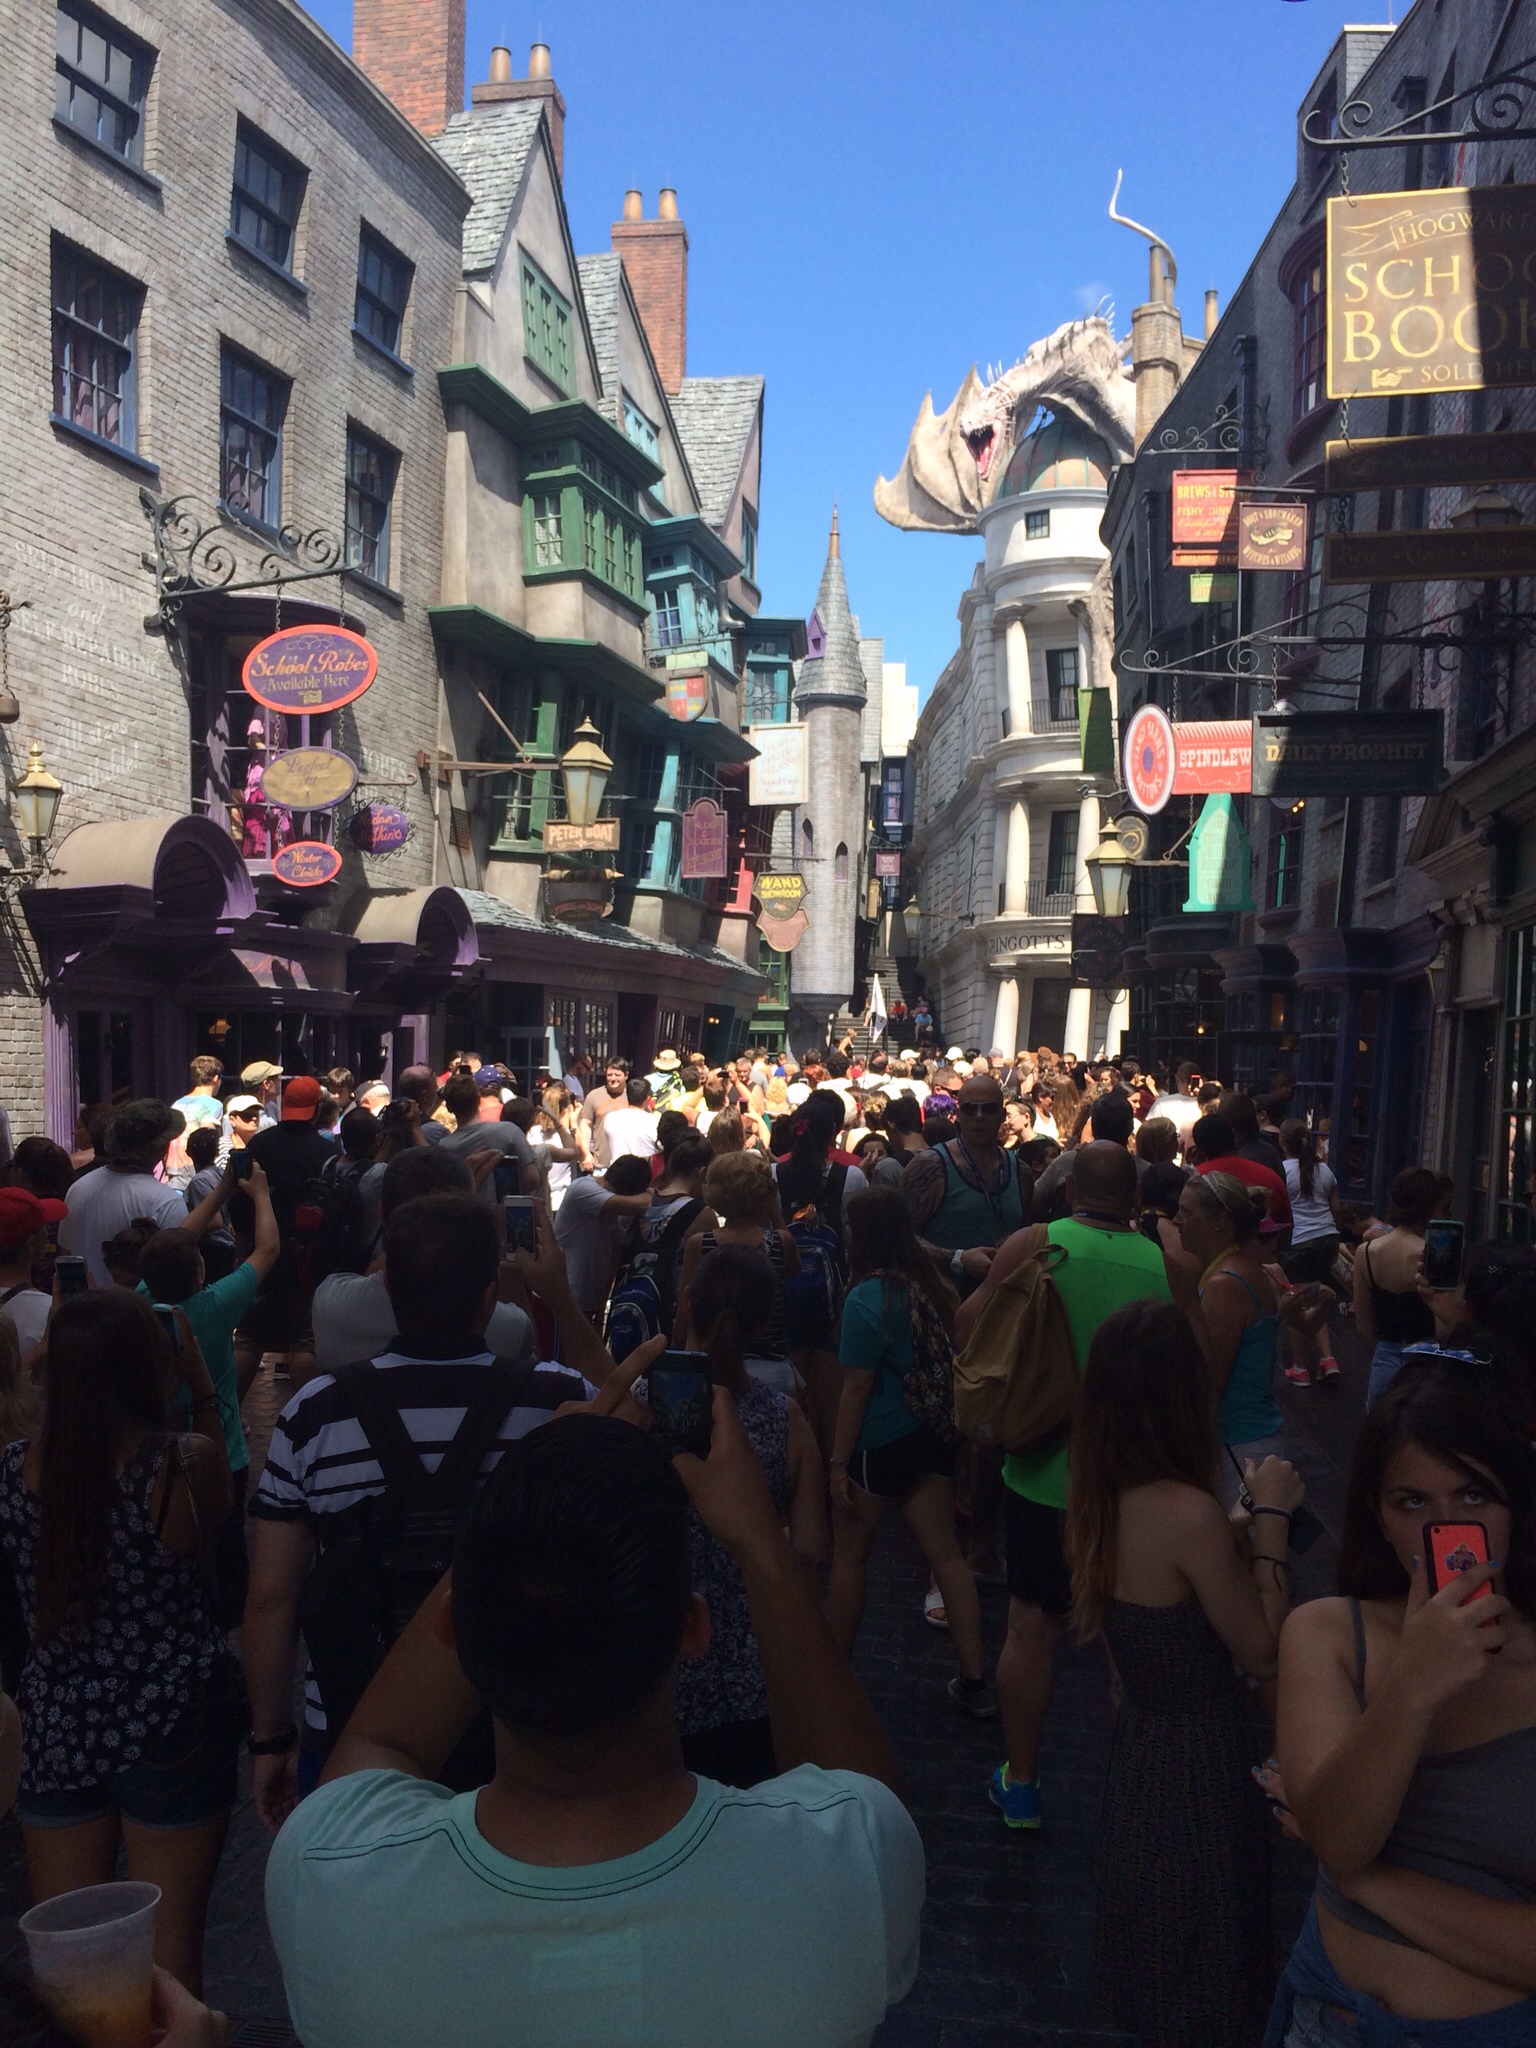 New Wizarding World of Harry Potter Diagon Alley Touring Plans |  TouringPlans.com Blog